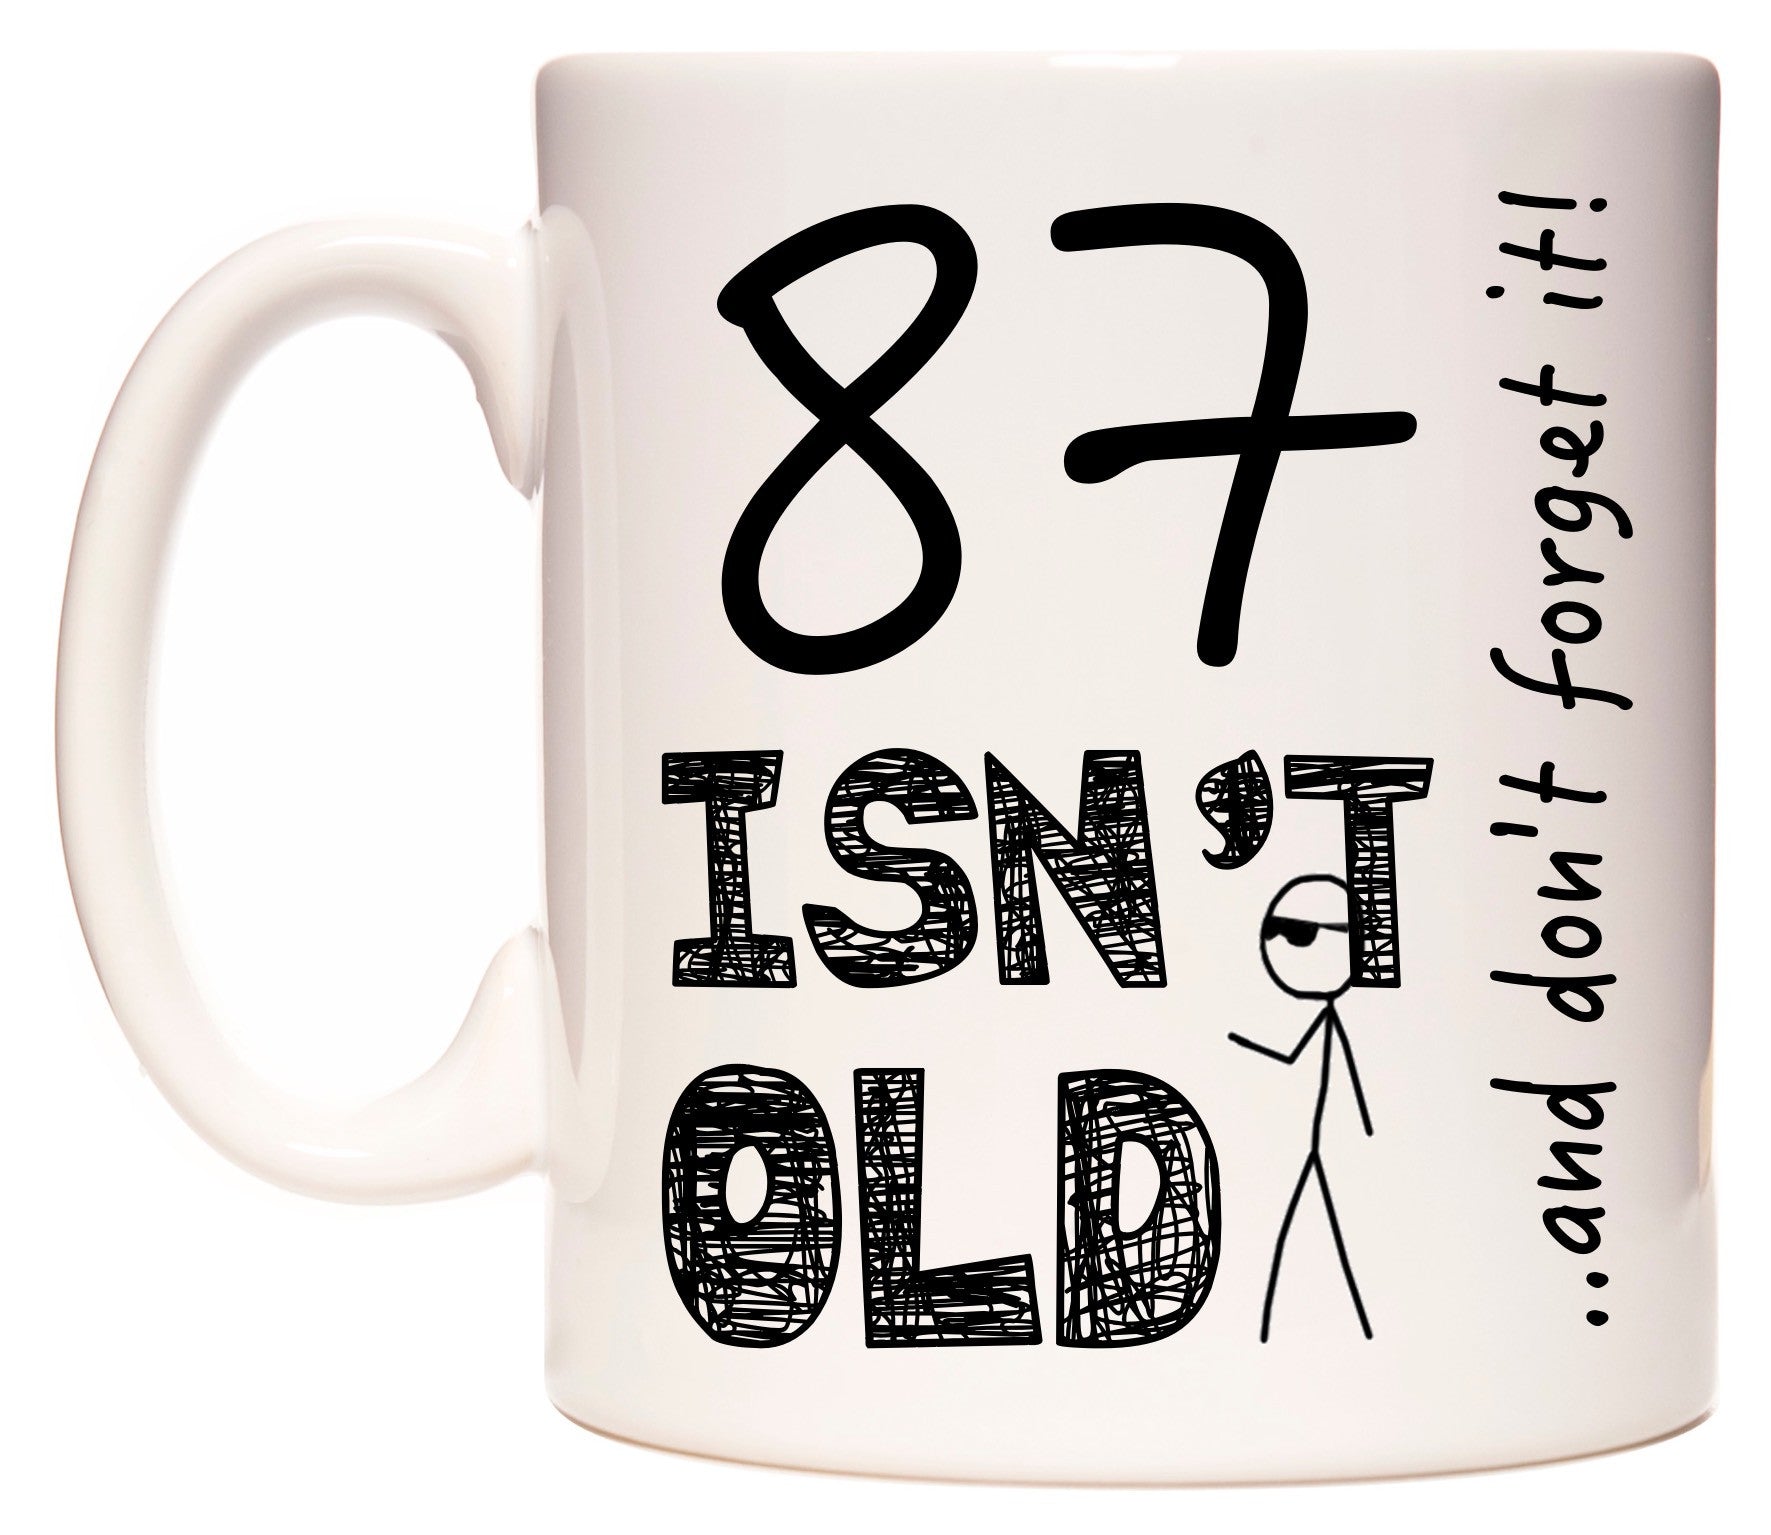 This mug features 87 Isn't Old